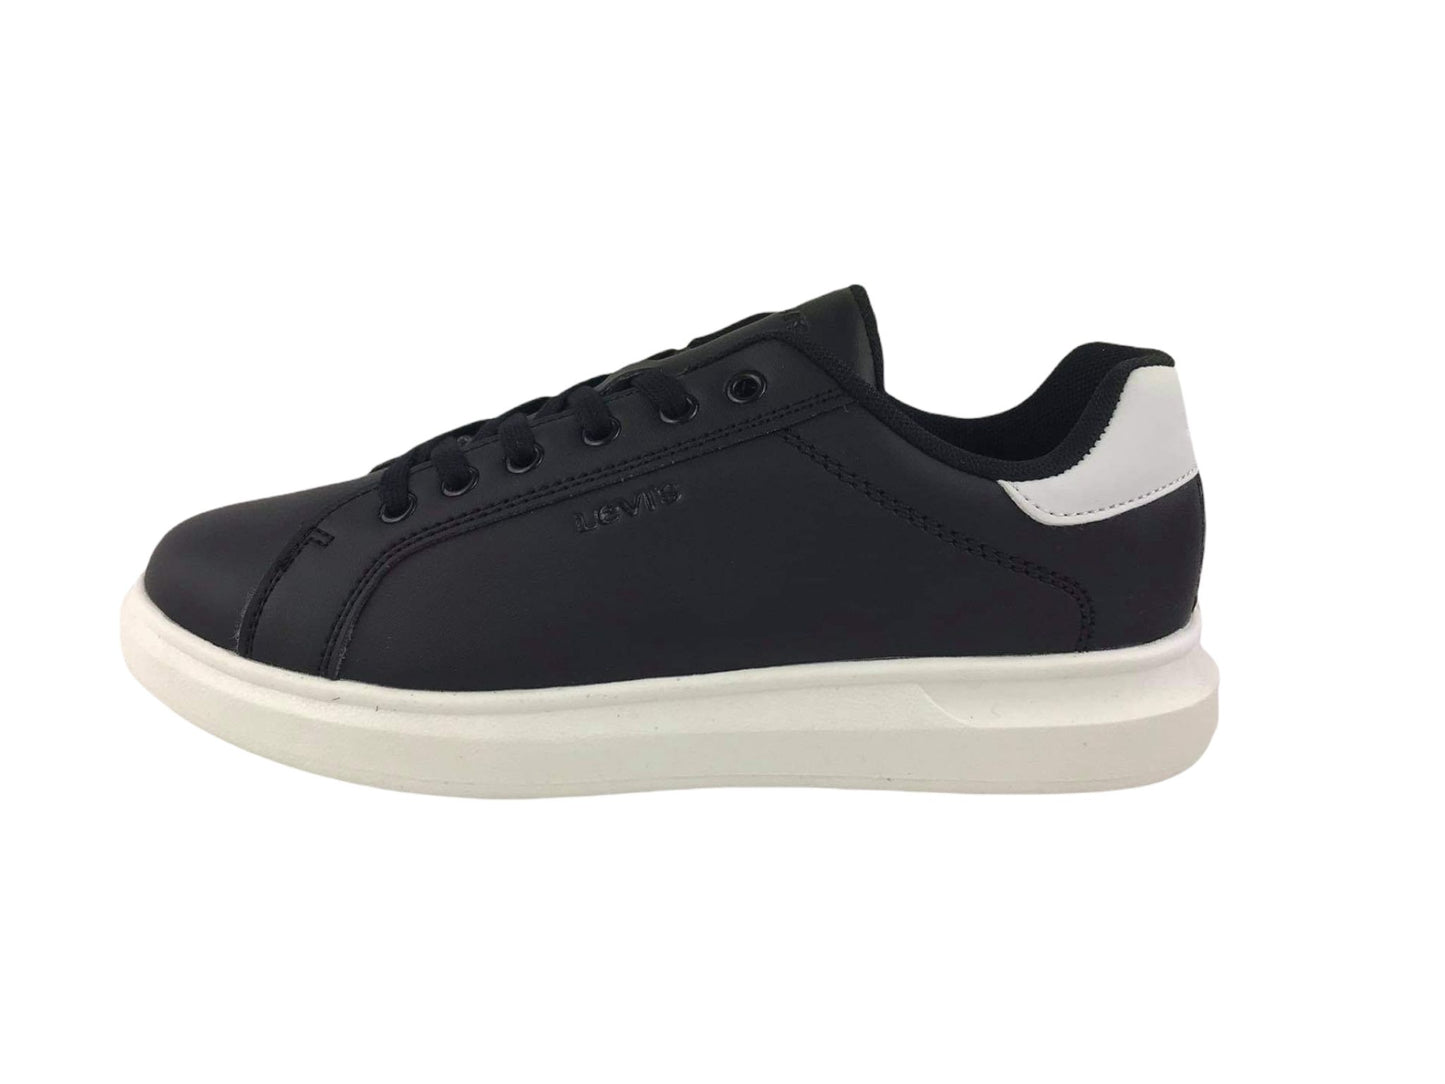 Levi's | Unisex synthetic leather sneakers with laces in black tones with white details Yuta